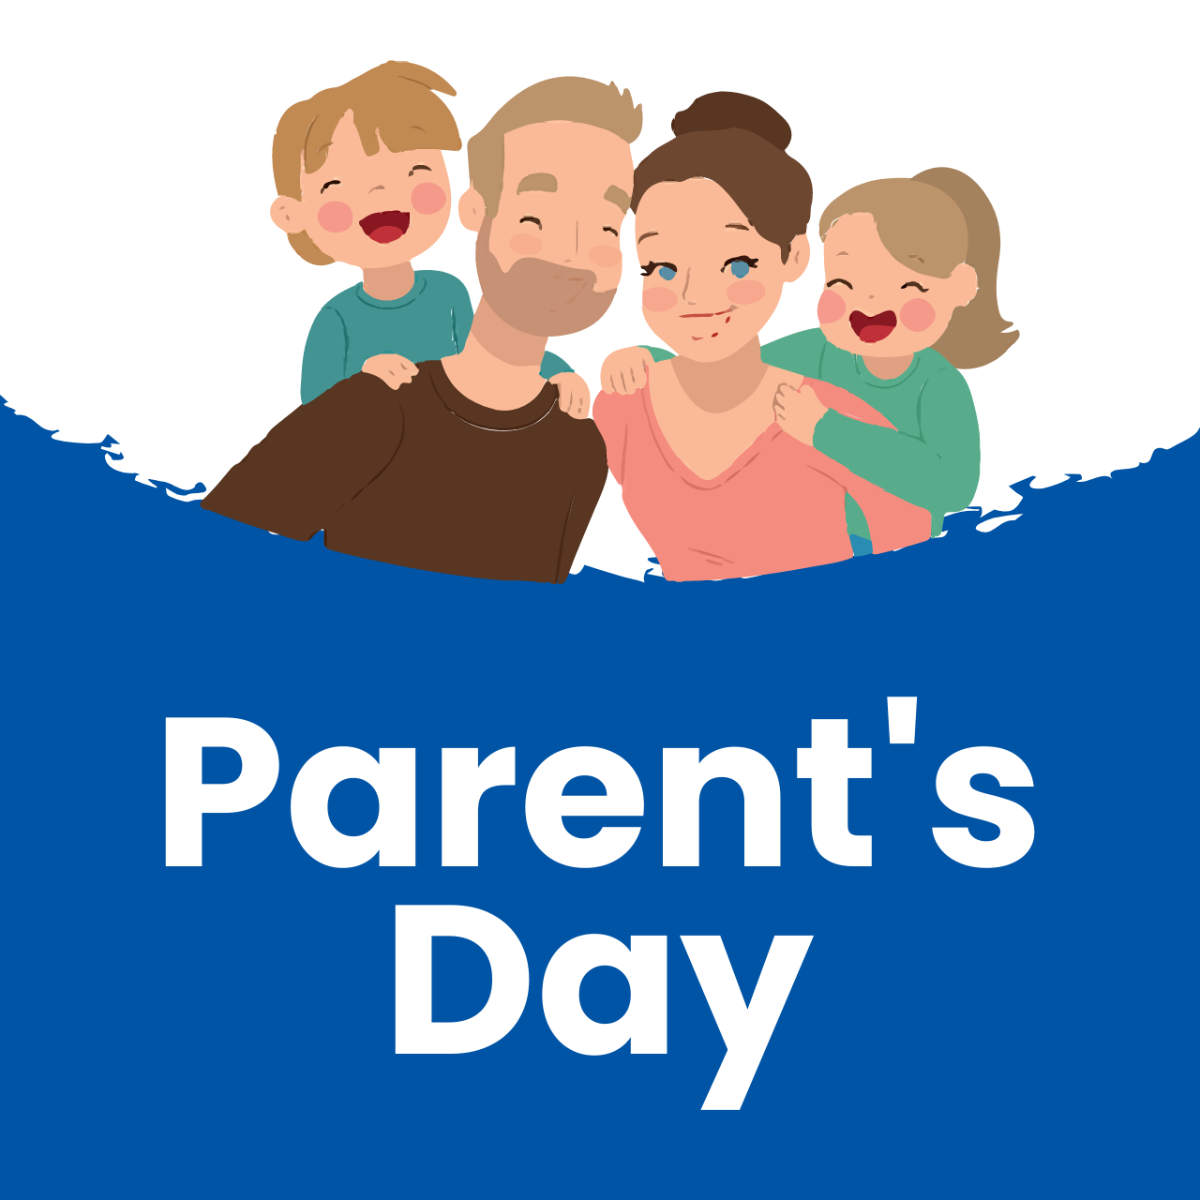 Free Parent's Day Tumblr Profile Photo Template